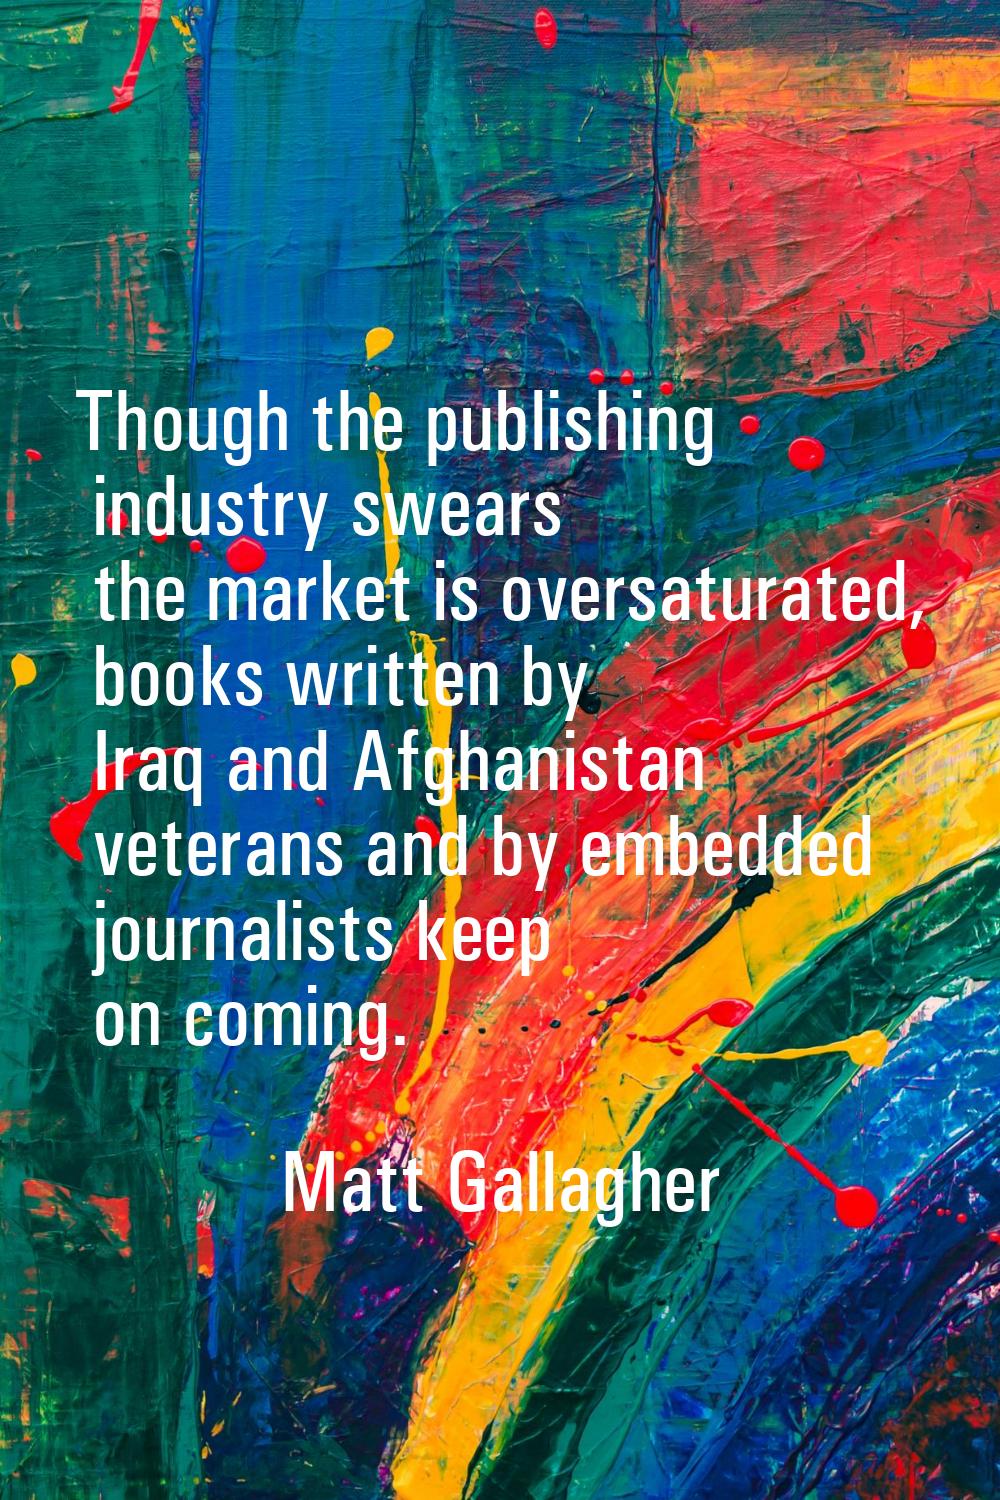 Though the publishing industry swears the market is oversaturated, books written by Iraq and Afghan